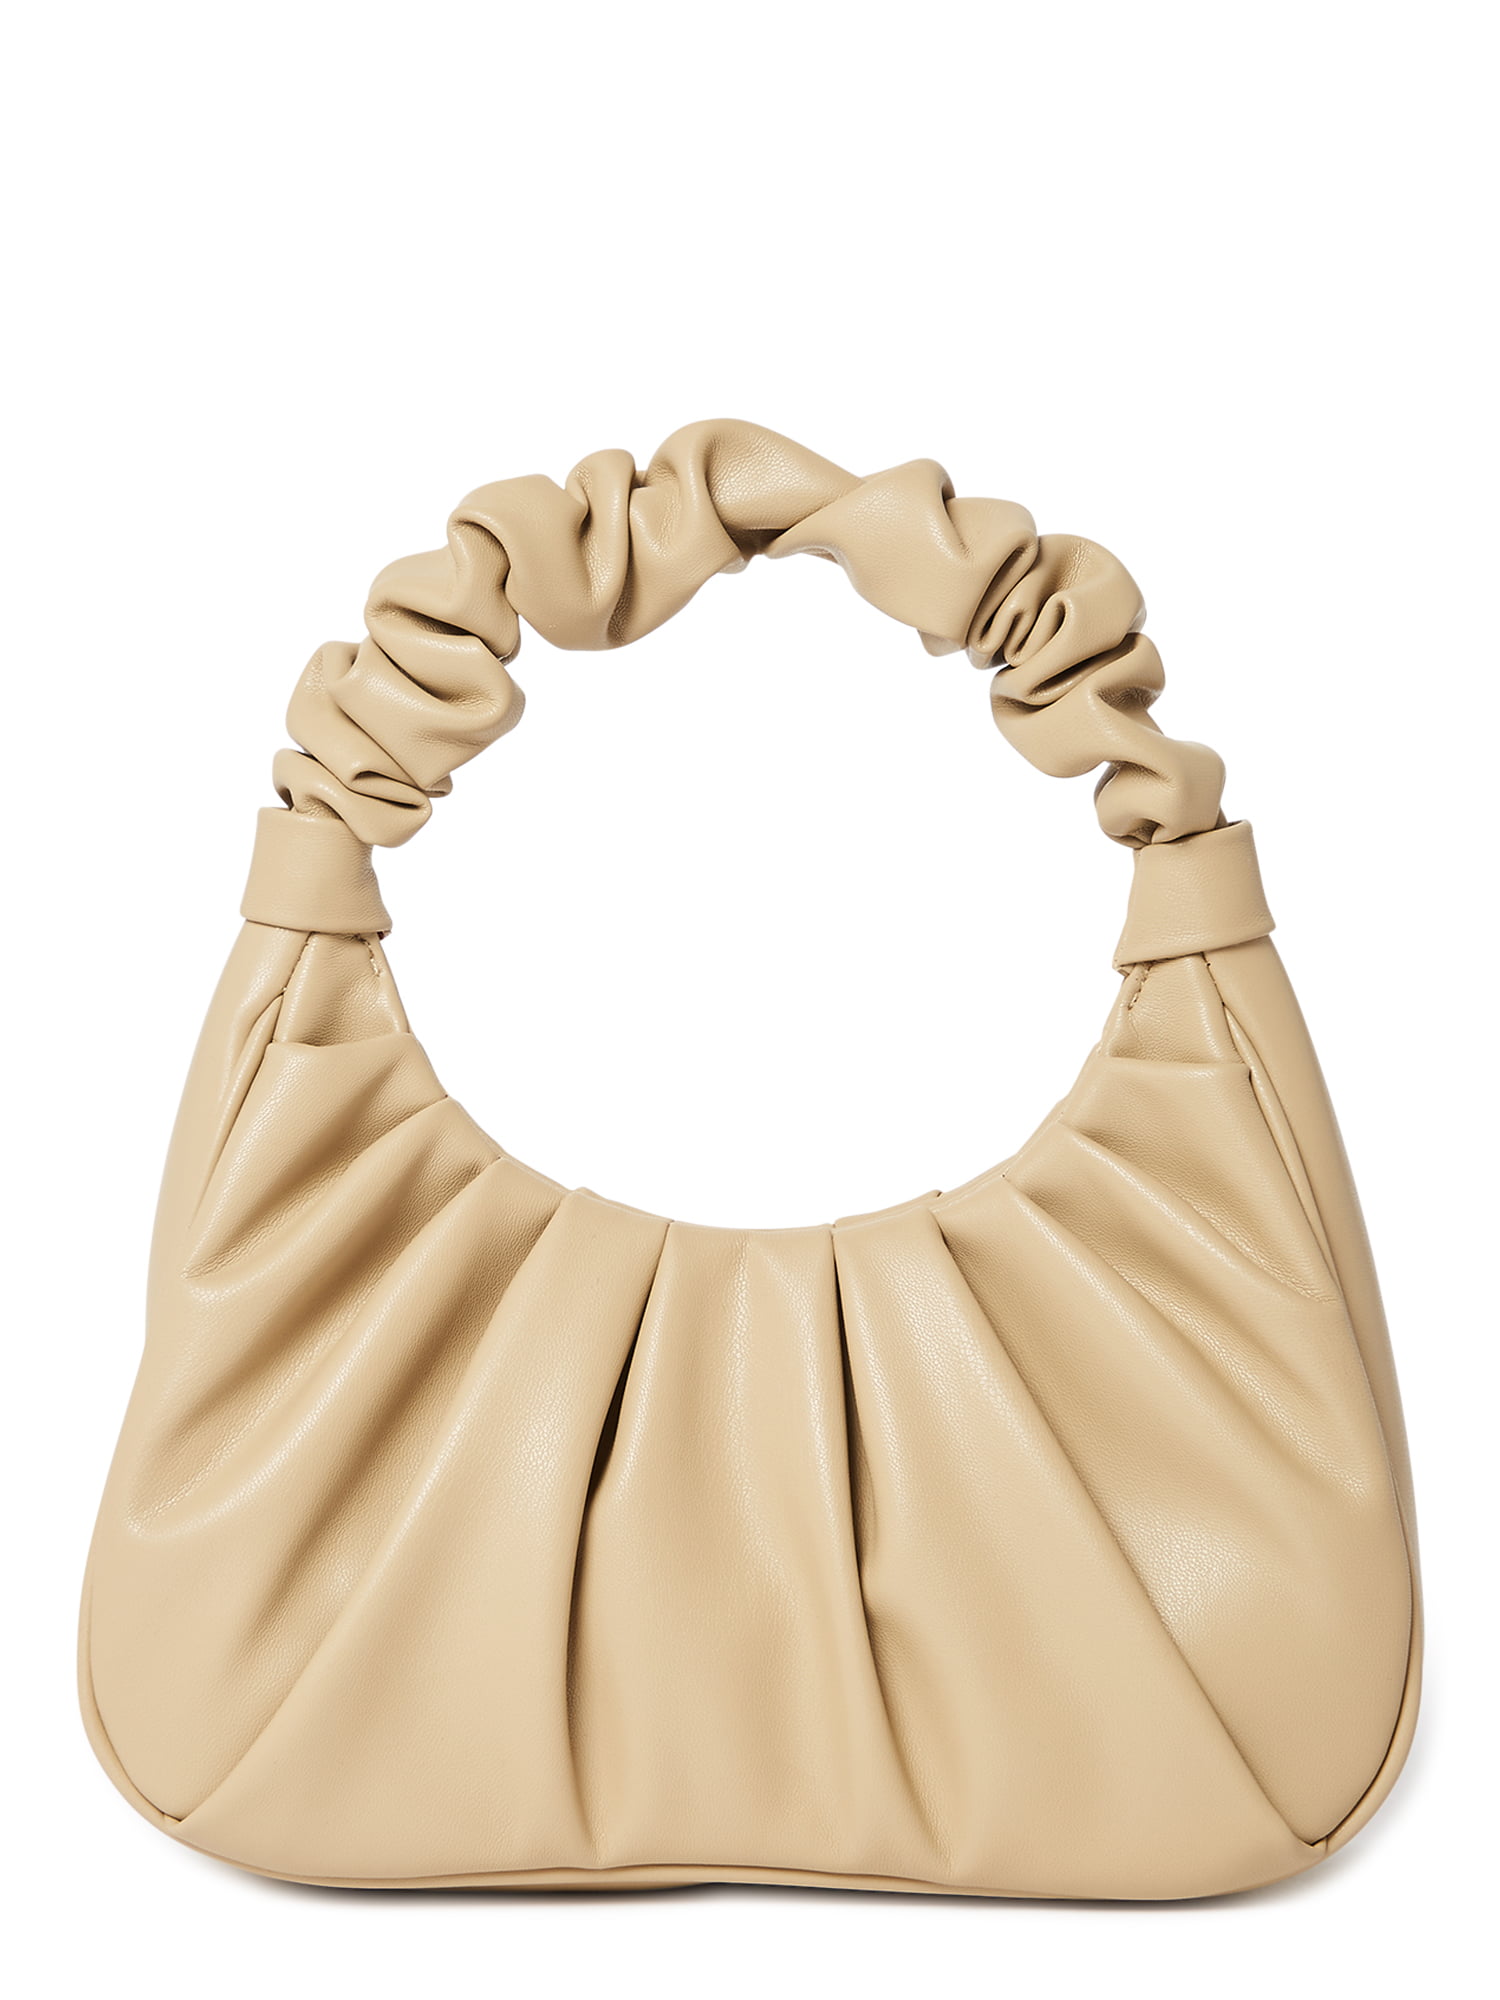 A Review of the Scrunchie Shoulder Bag From Walmart, 2021